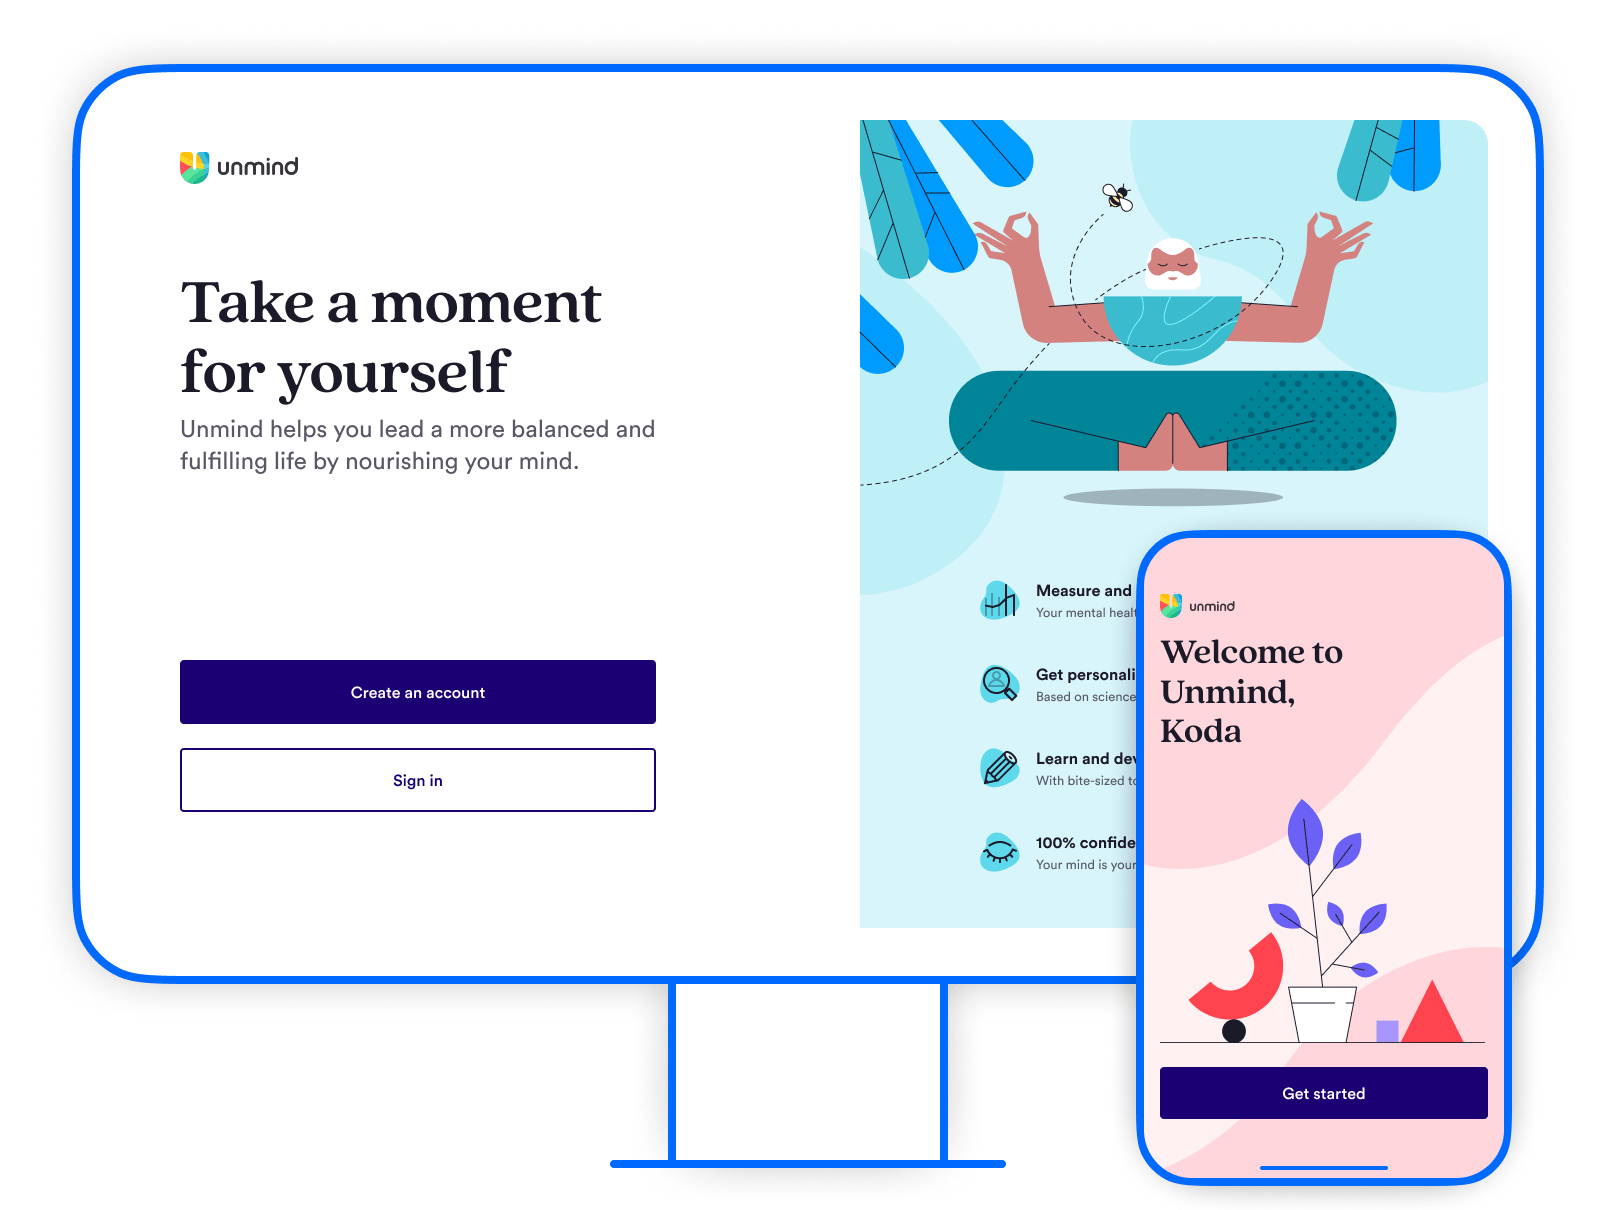 A mobile device sits in front of a desktop device. Desktop shows the opening screen of the new registration flow. Title says 'Take a moment for yourself', followed by copy 'Unmind helps you lead a more balanced and fulfilling life by nourishing your mind'. An illustration shows a bearded man meditating while floating cross-legged. The mobile shows the final screen of the flow. Title says 'Welcome to Unmind Koda', with a button entitled 'Get started'. An illustration shows a plant growing to symbolise mental wellbeing growth.